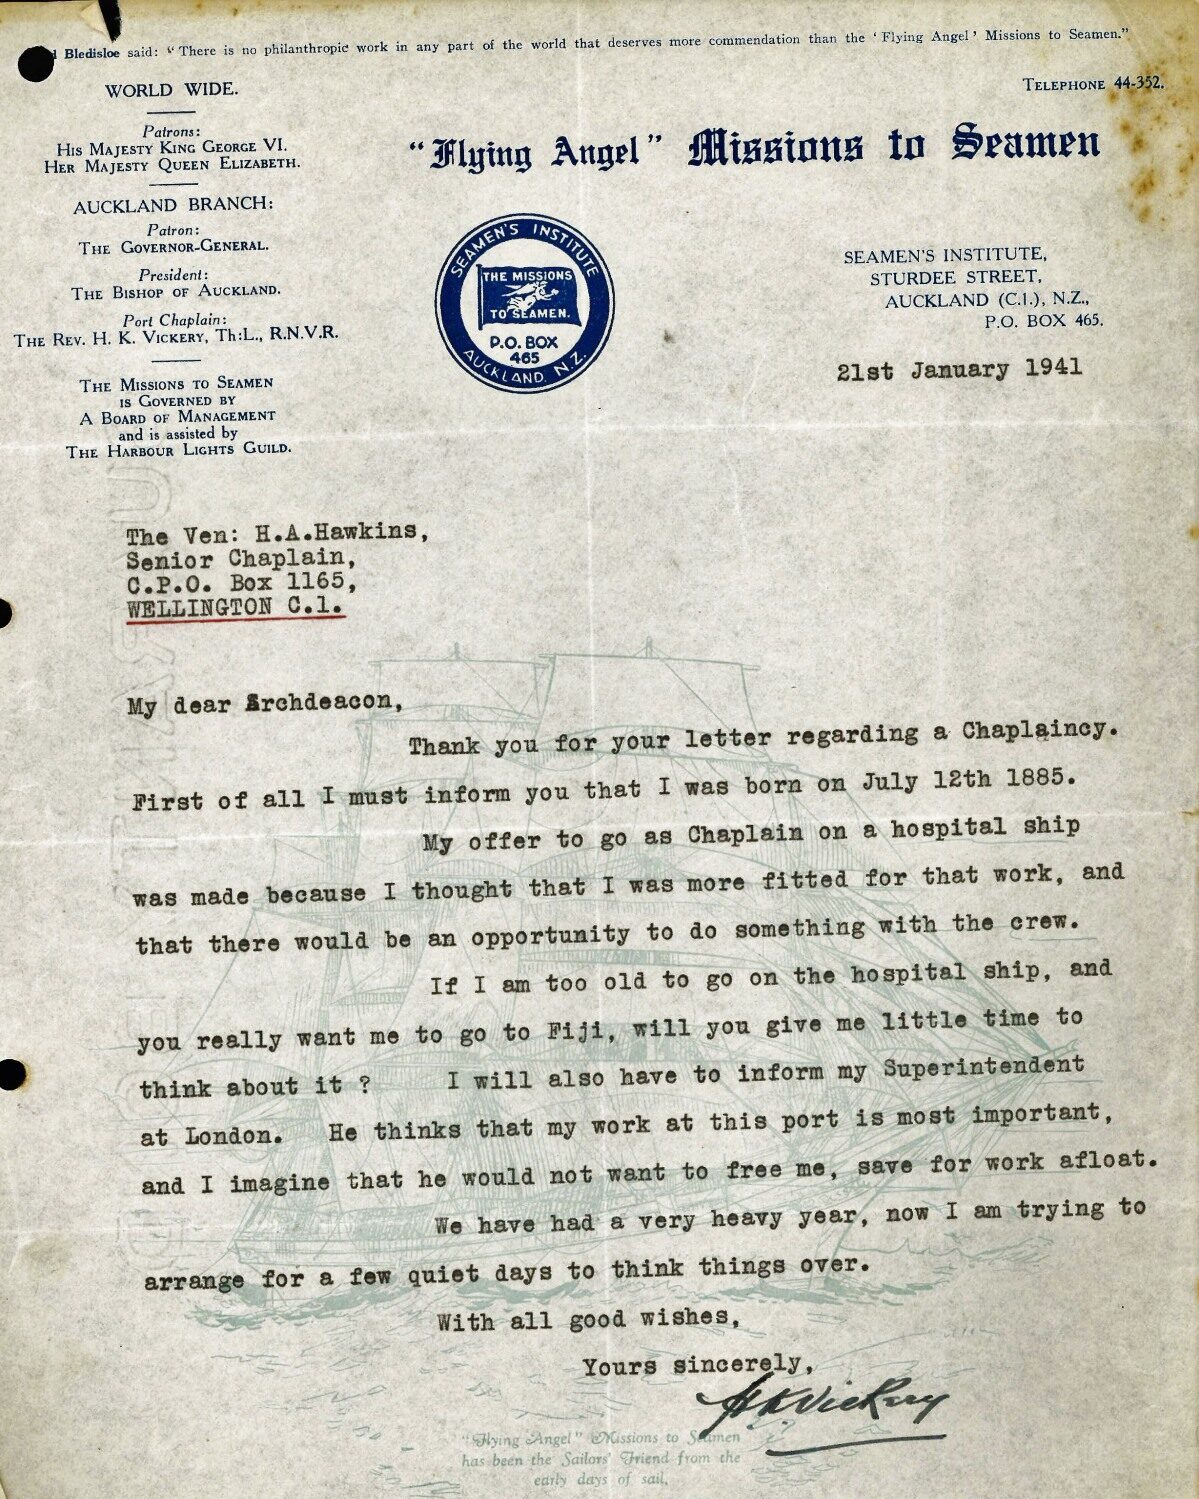 Image: Letter from Rev. H K Vickery to Archdeacon H A Hawkins regarding volunteering, 21 January 1941 [Archives reference: ANG 55-6-16]